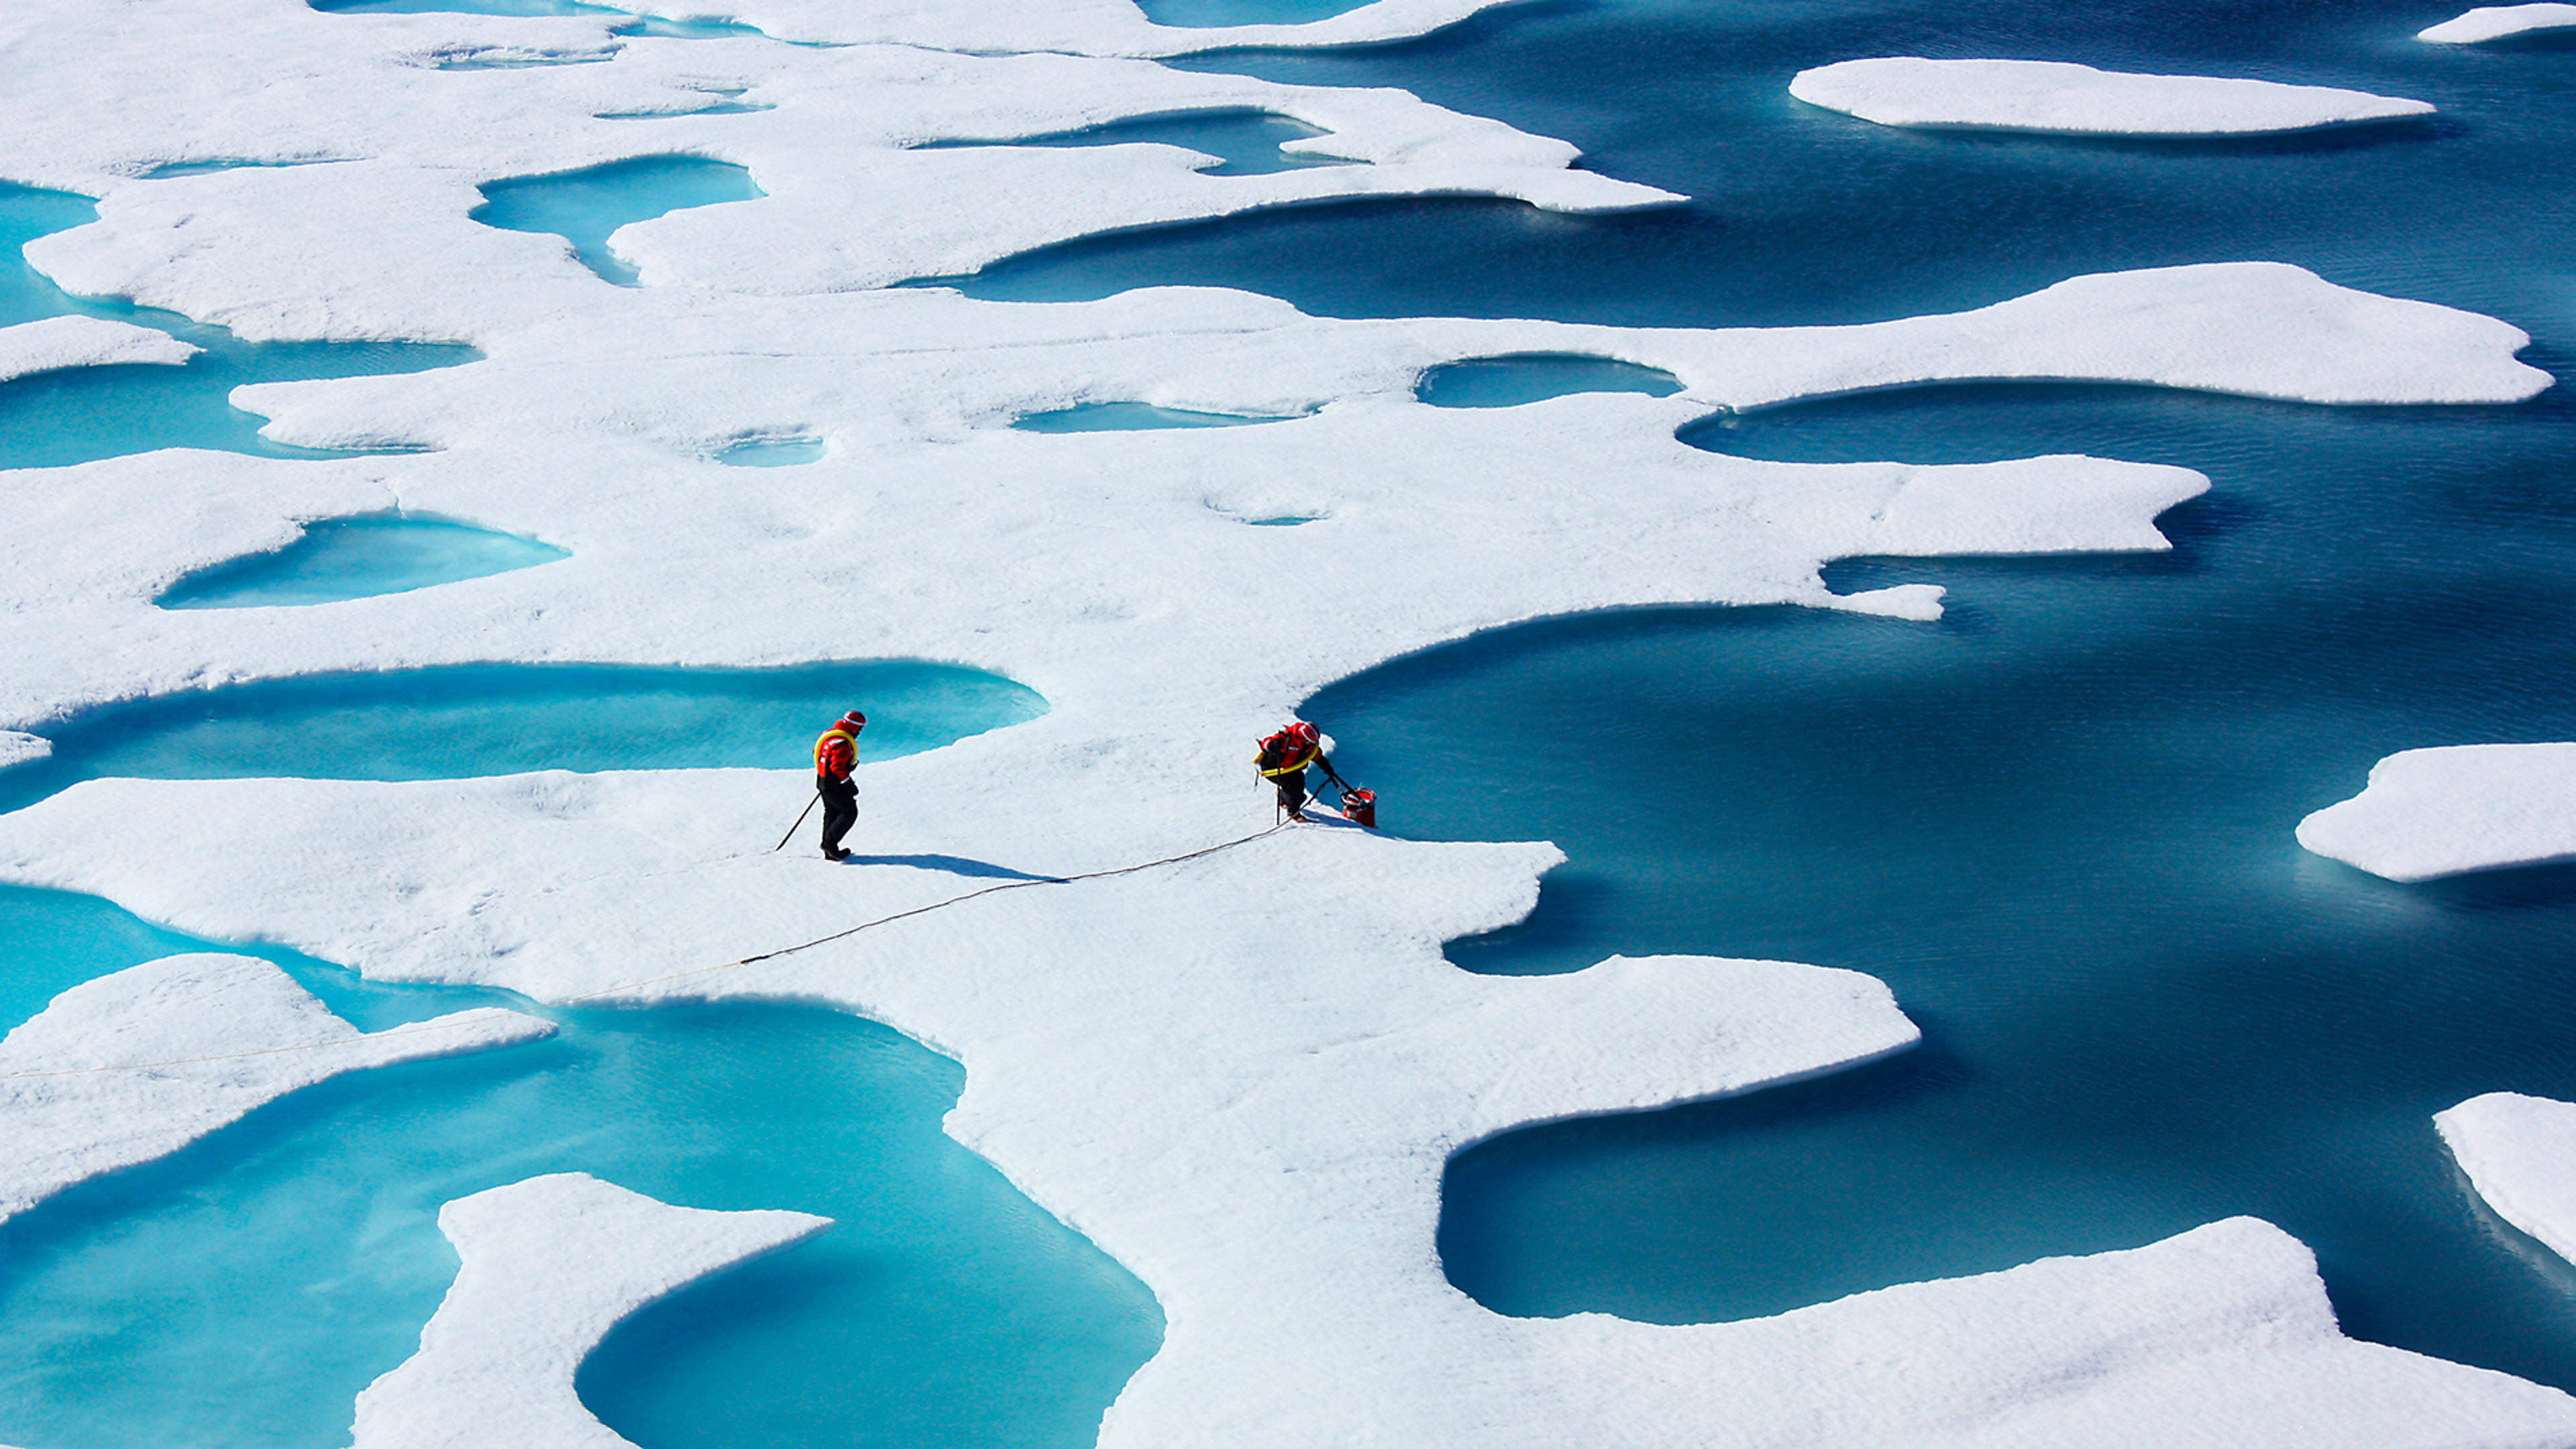 NASA scientists explain what’s driving the decline in Arctic sea ice